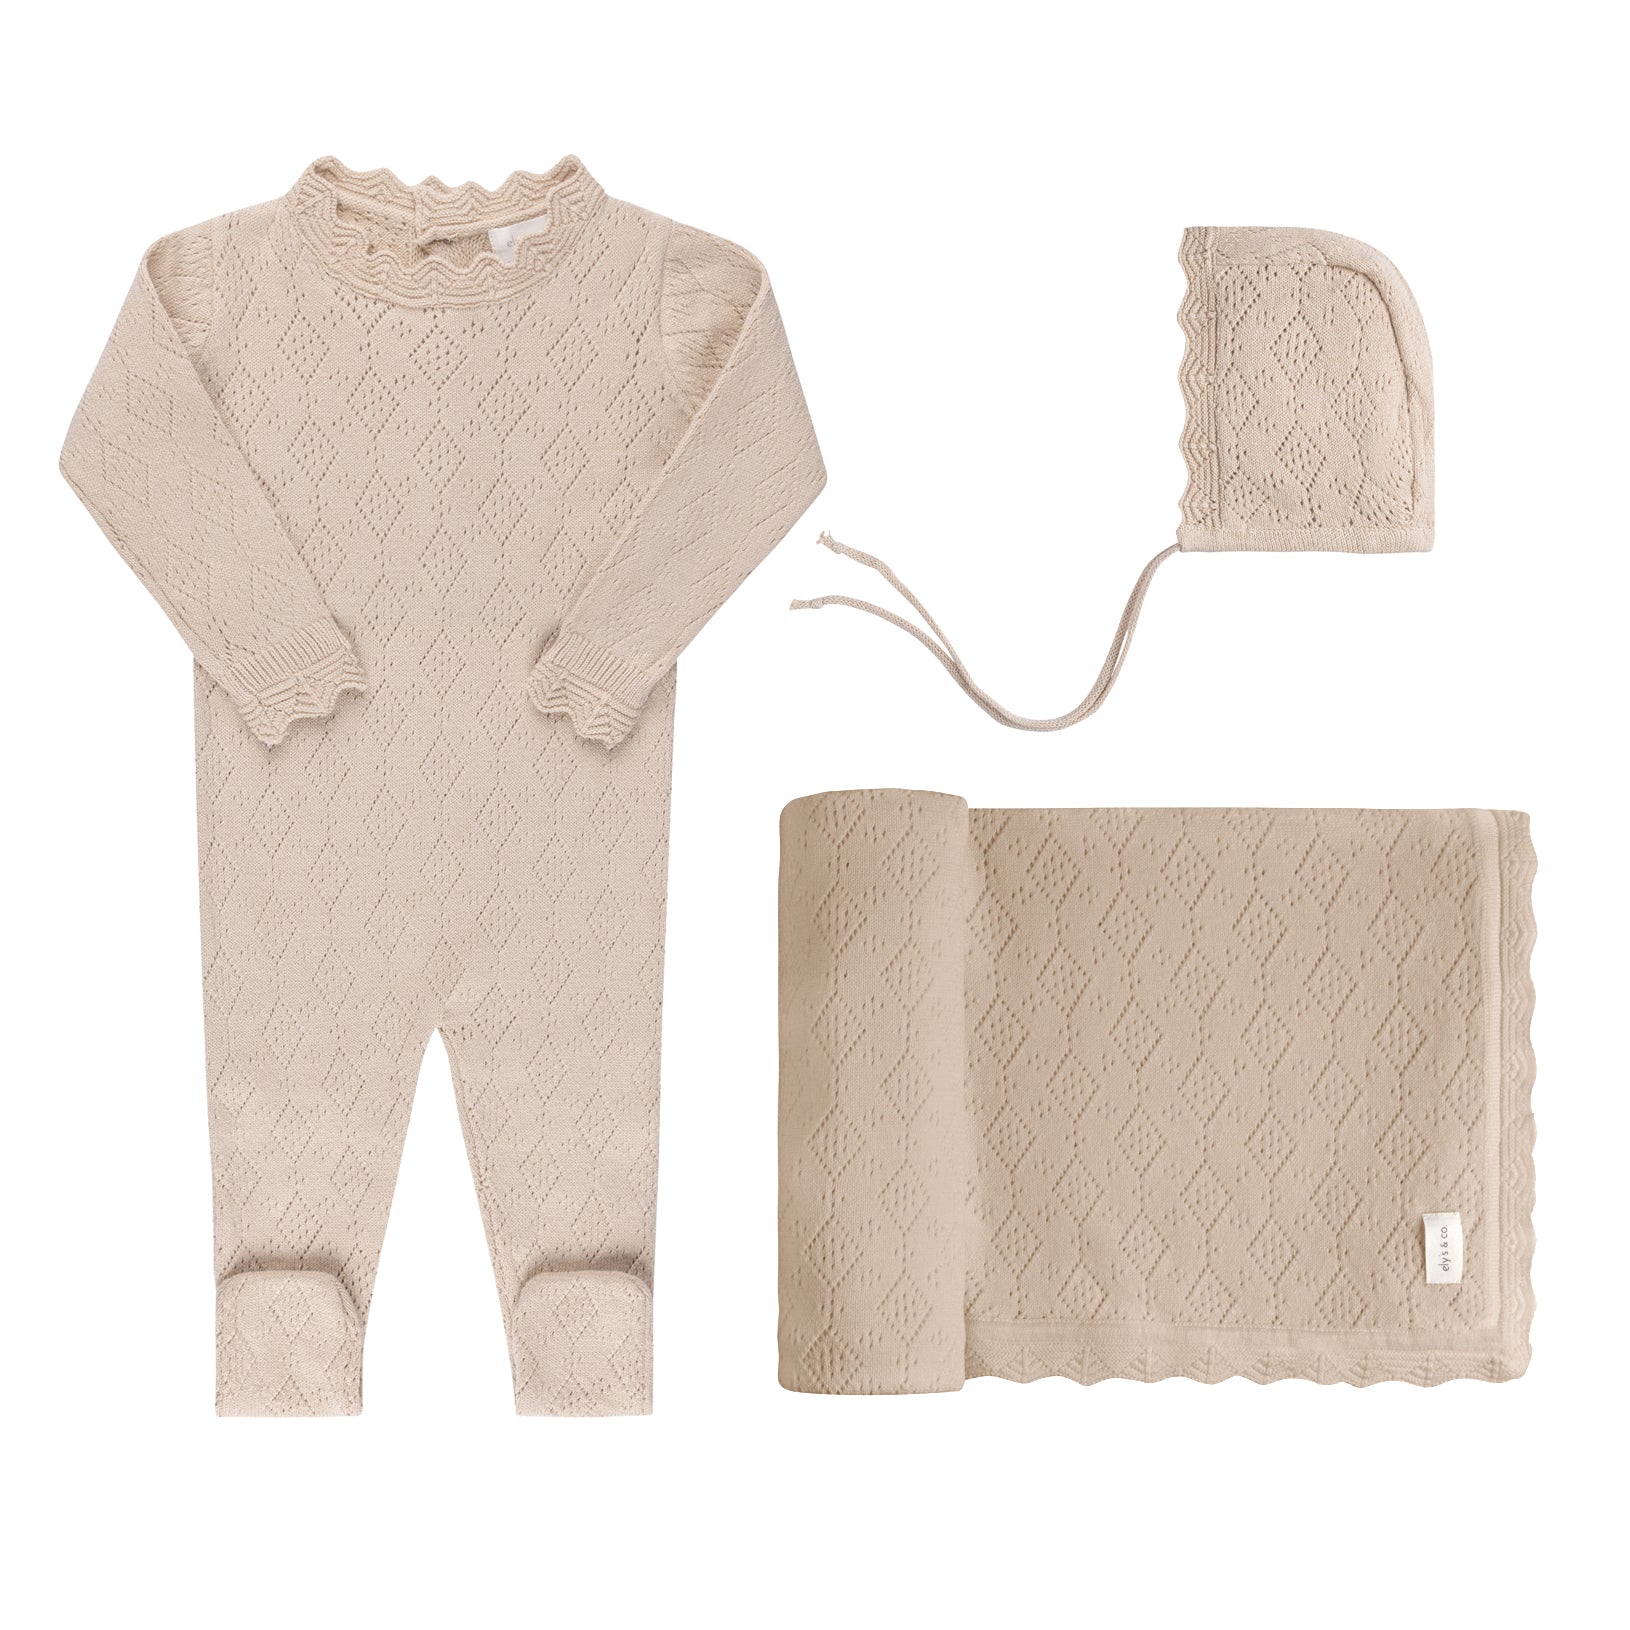 Pointelle Knit Collection - Take Me Home Sets